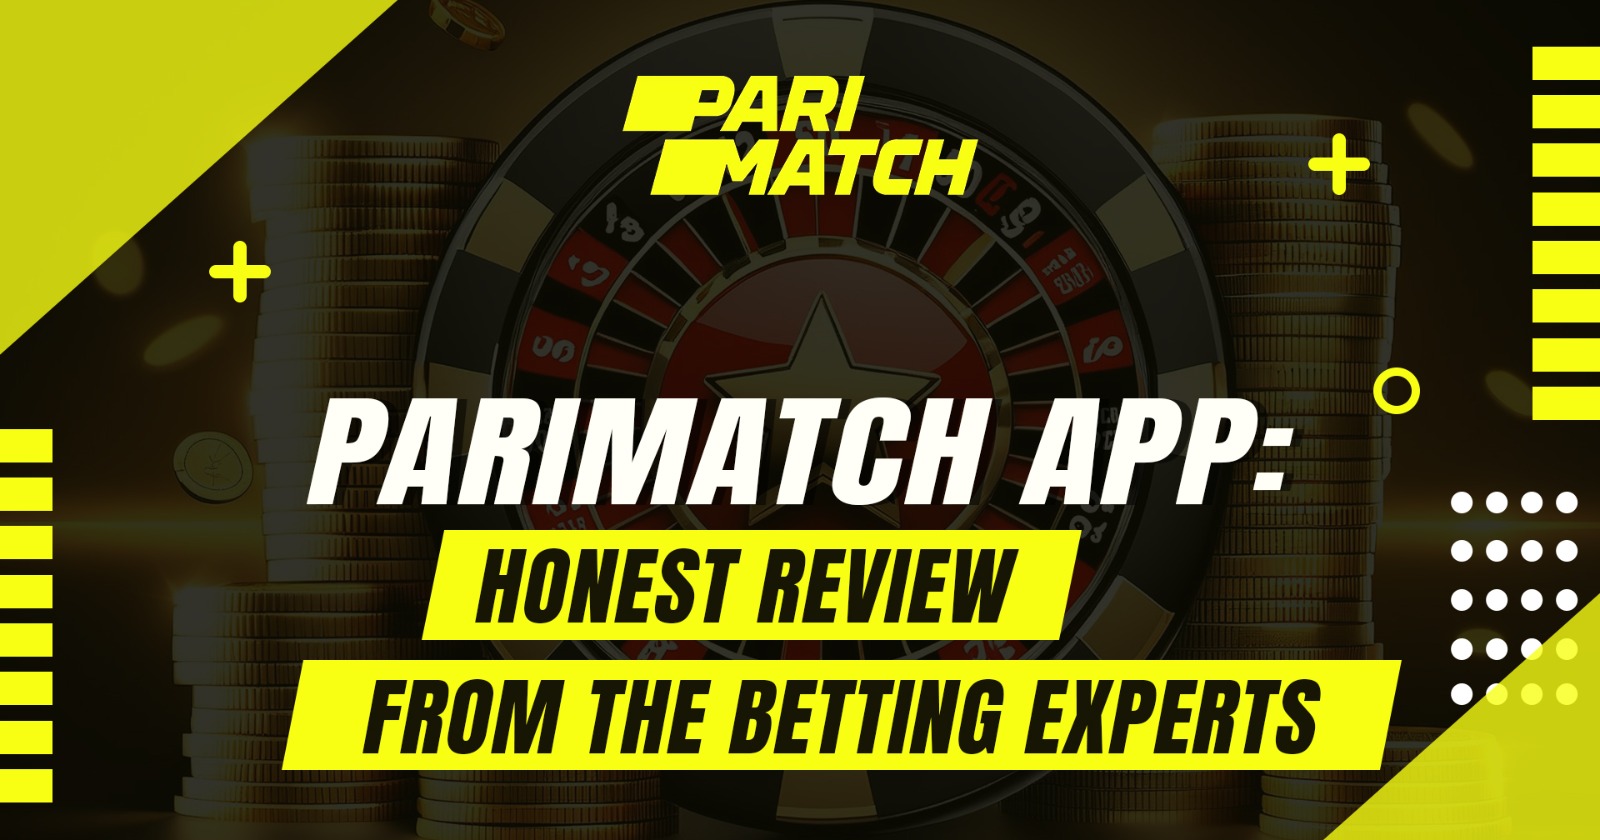 Parimatch App: Honest Review From the Betting Experts » WingsMyPost